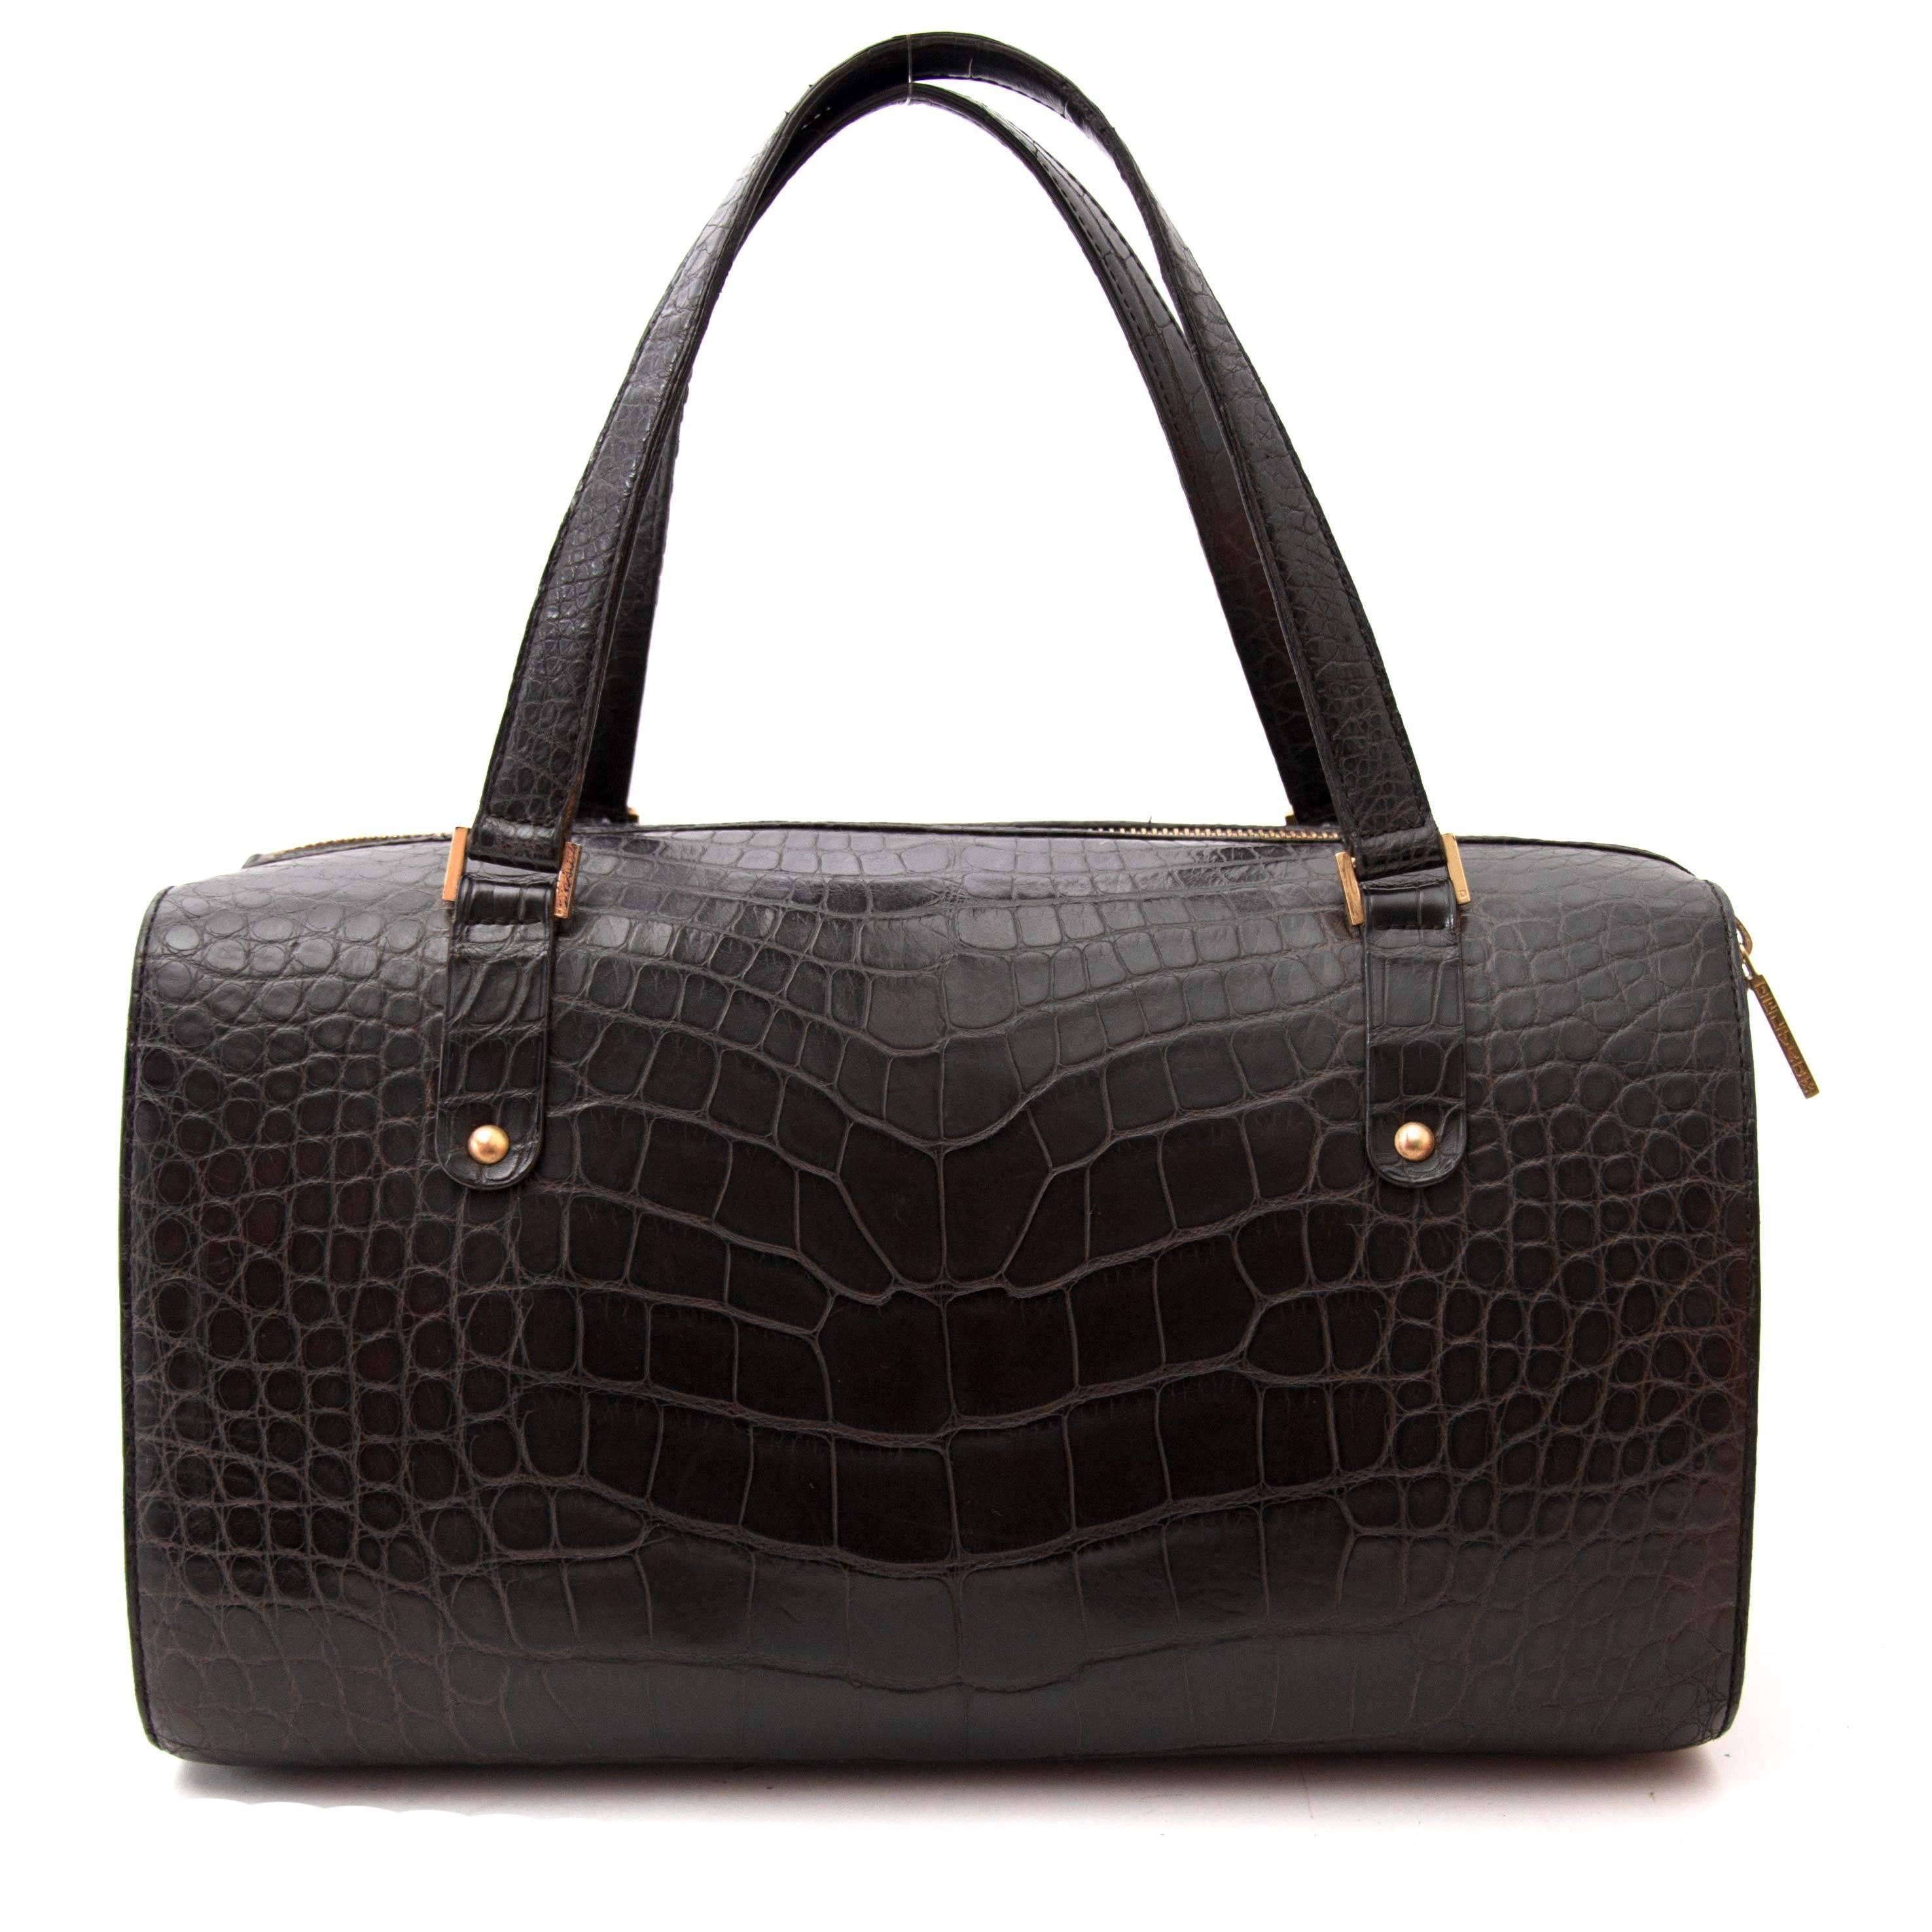 Very good condition

Delvaux Le Astrid Bag Croco

This beautifully crafted Delvaux Louise Boston bag comes in a crocodile leather. This is a true beauty that will never go out of style. On the front of the bag you can see the iconic D-logo.

The bag